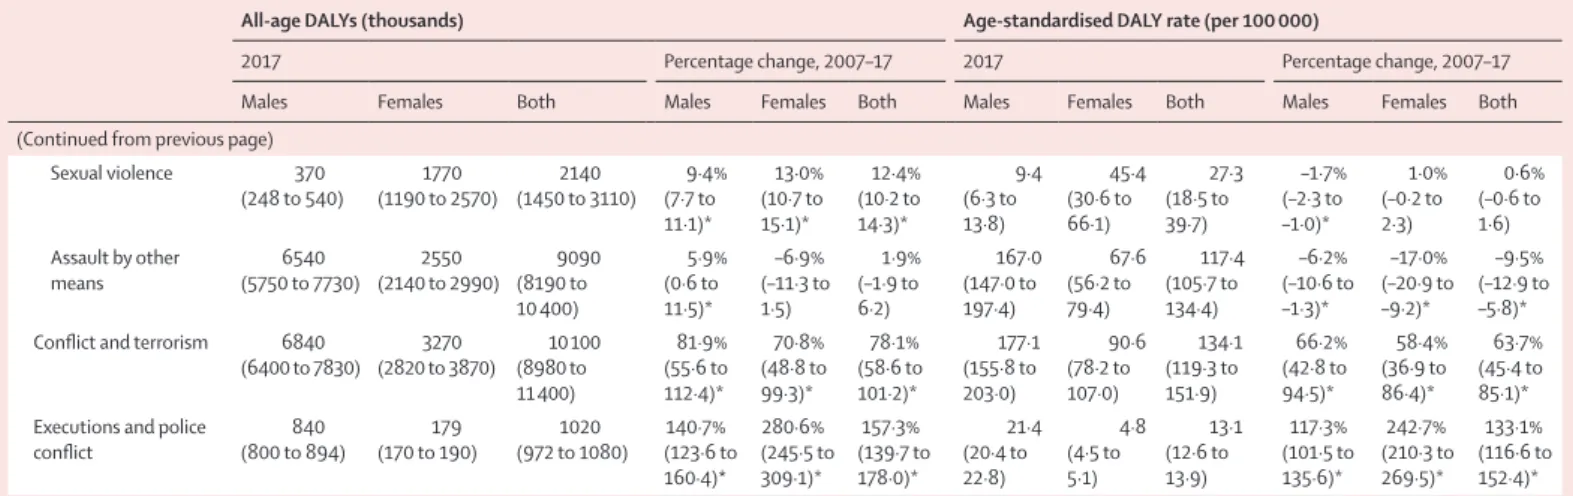 Table 3: Global all-age DALYs and age-standardised DALY rates in 2017 with percentage changes between 2007 and 2017 for all causes, by sex